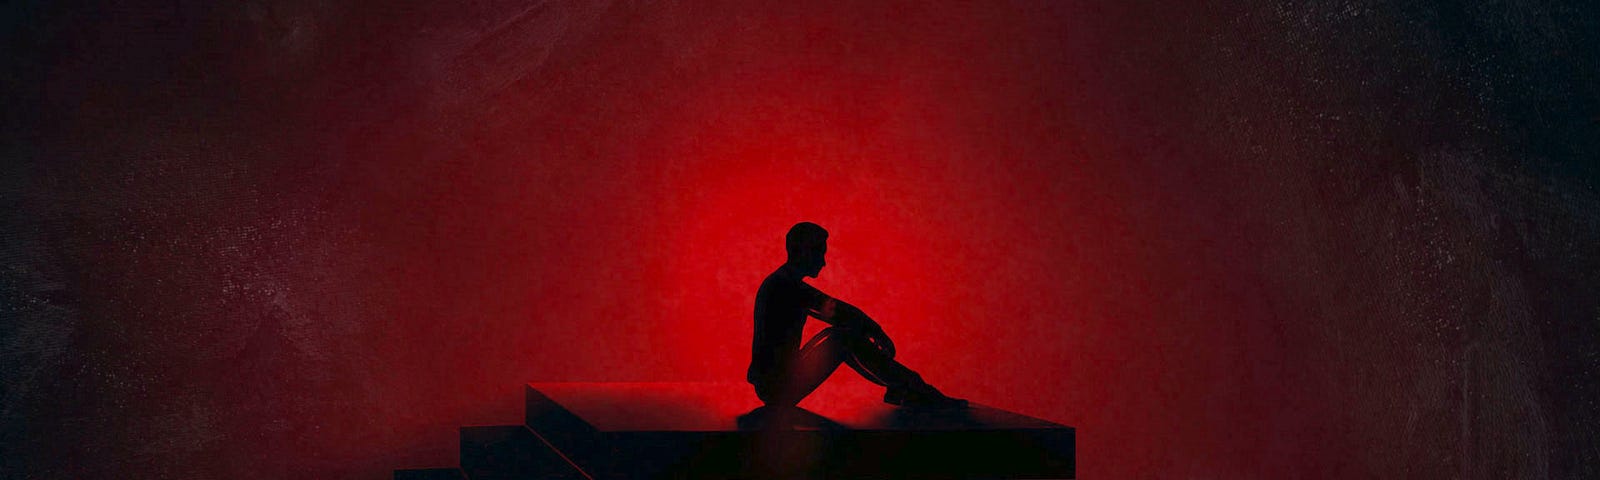 A person sitting on a staircase in a dark dystopian area backlit by an ominous intensely bright crimson red light.